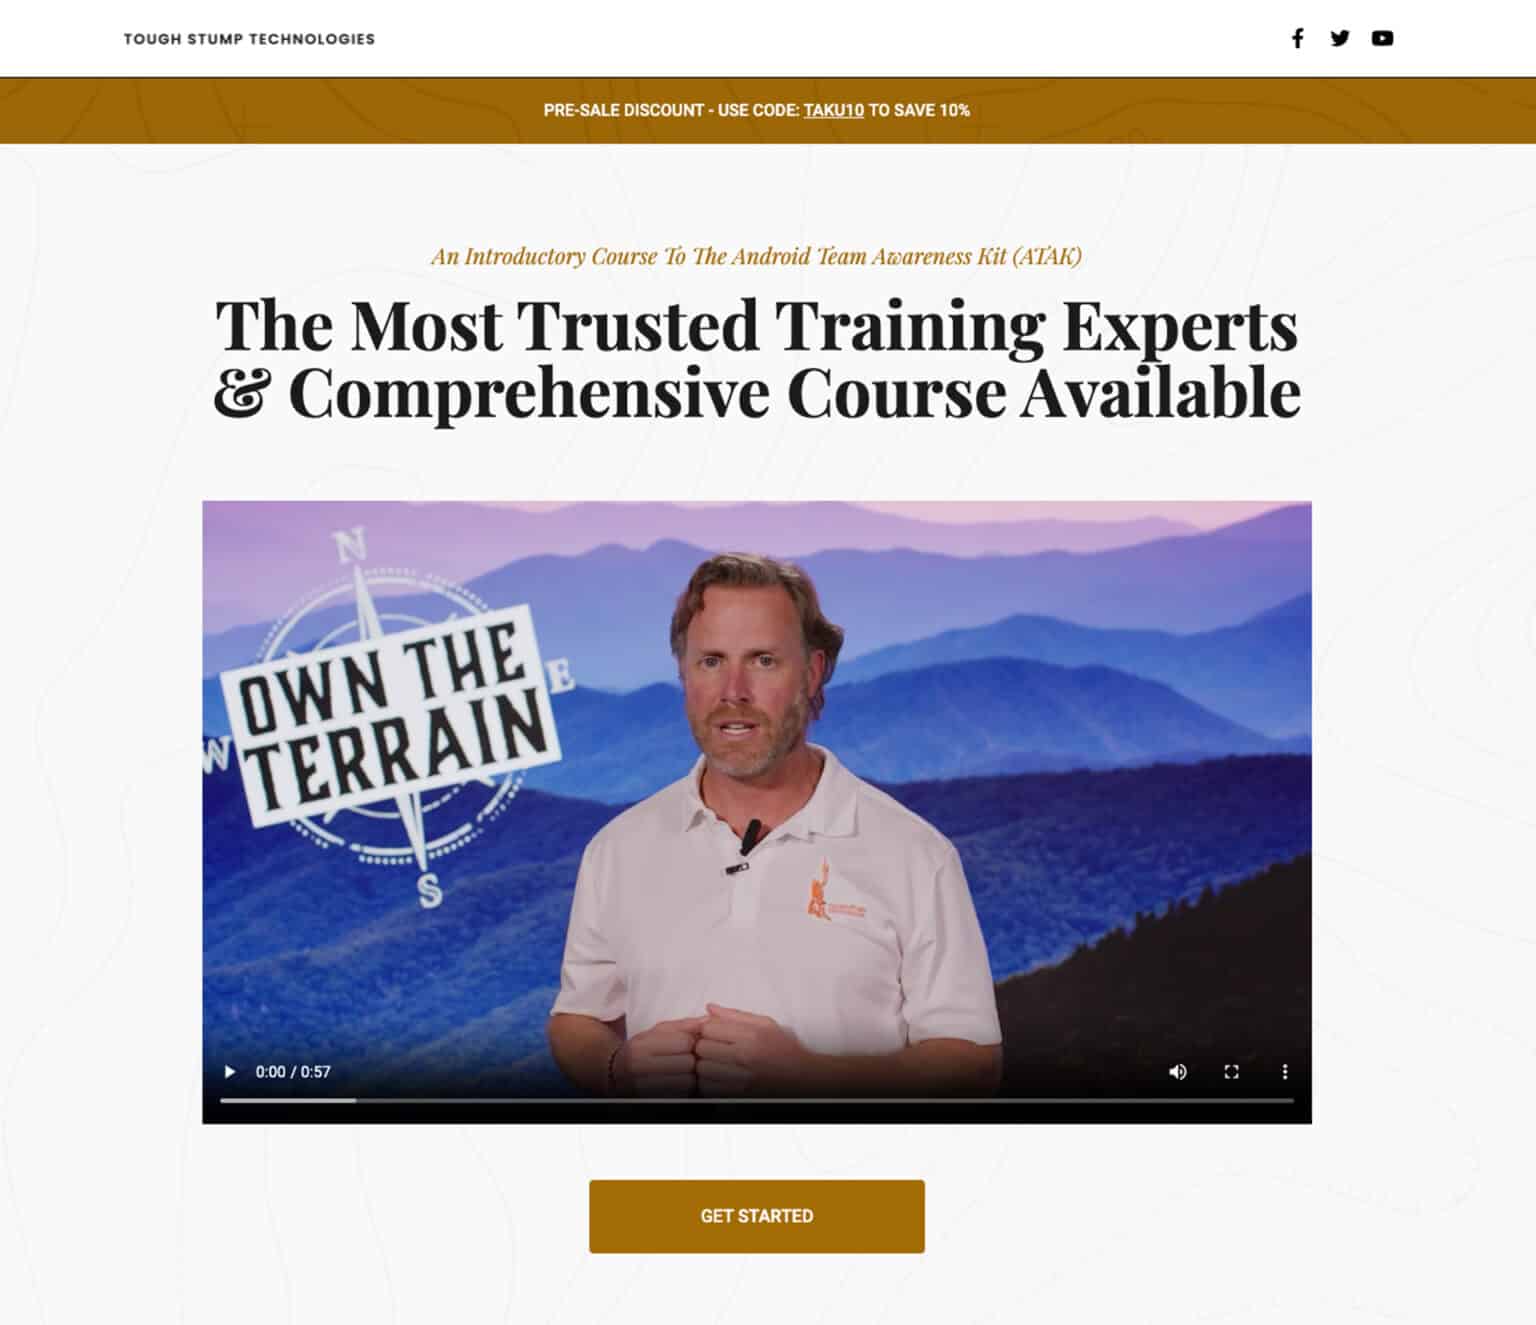 The most trusted training experts & comprehensive course available.